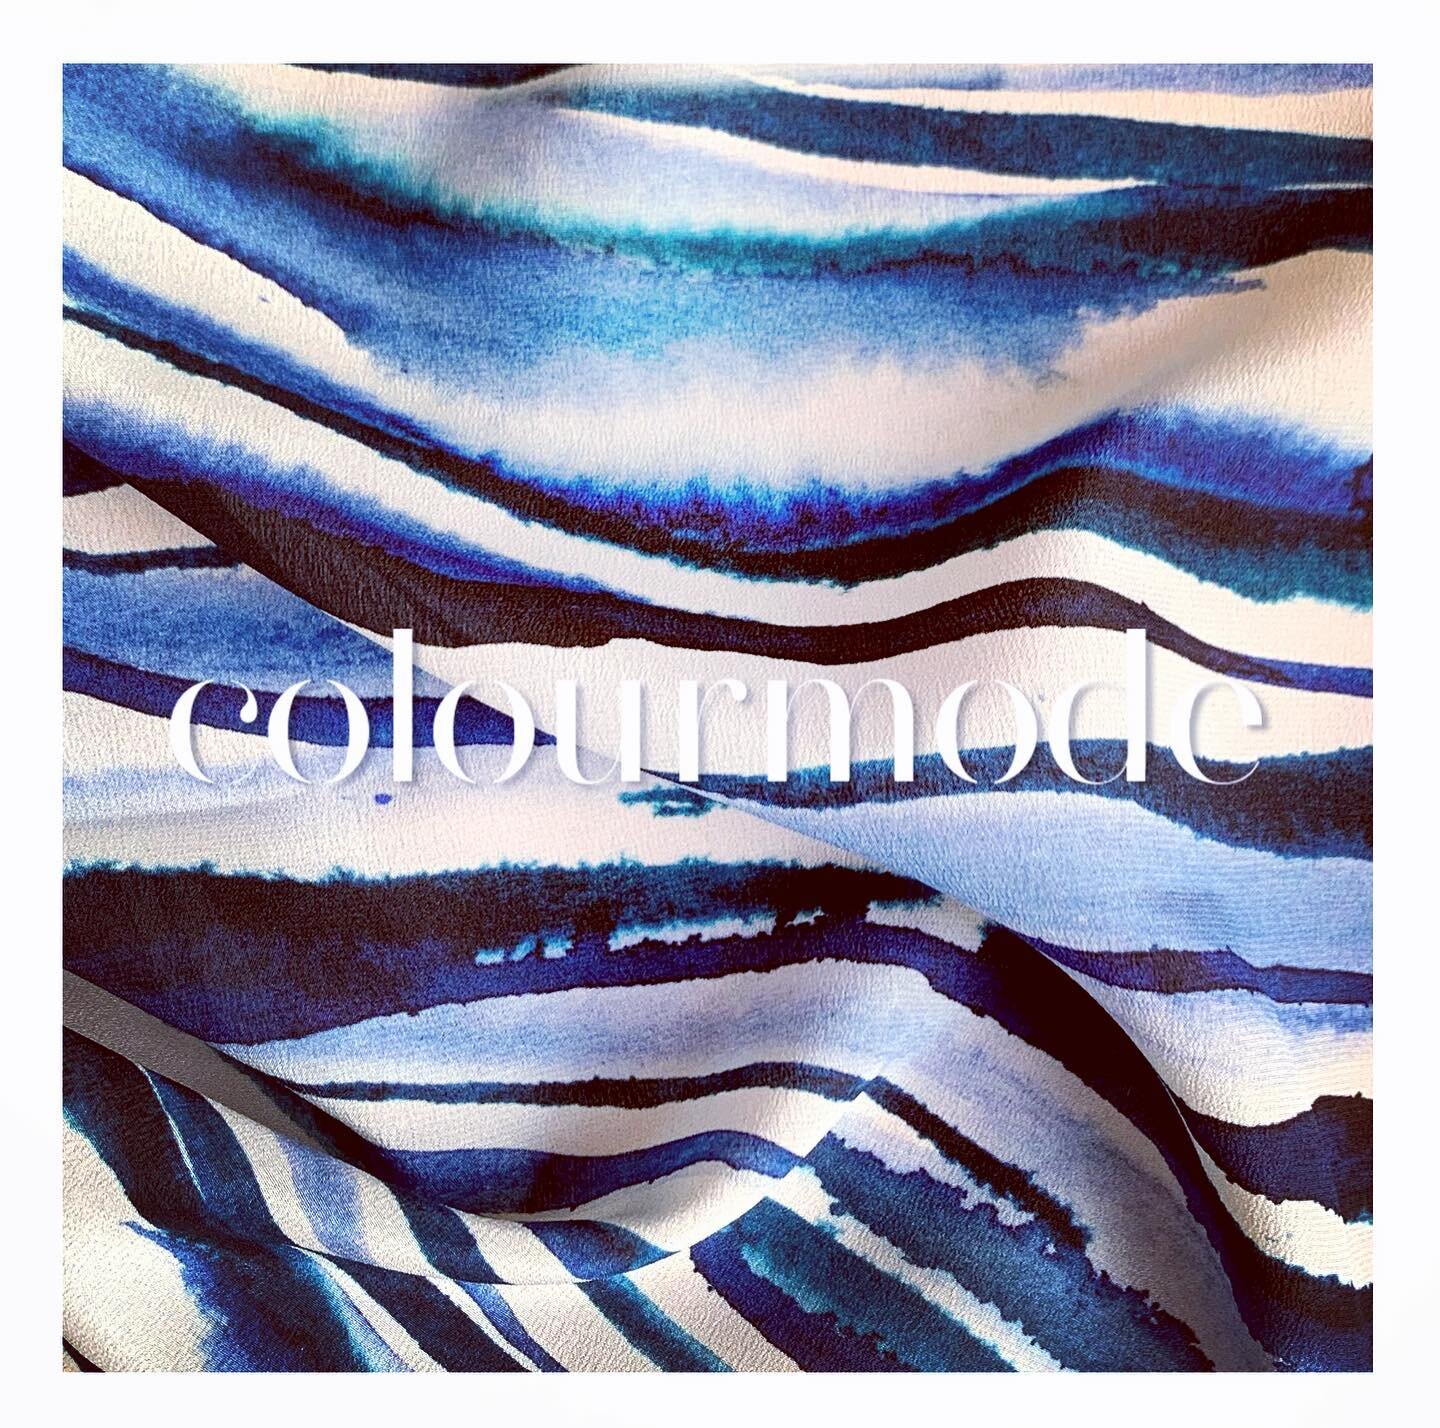 Ocean Textures 🐚🌊

Watercolour washes in calm blues. New collection online now, link in bio.
.
.

#colourmode #colourcrush #azure #ocean #watercolour #texture #fashion #trending #printdesign #comtemporaryart #vacation